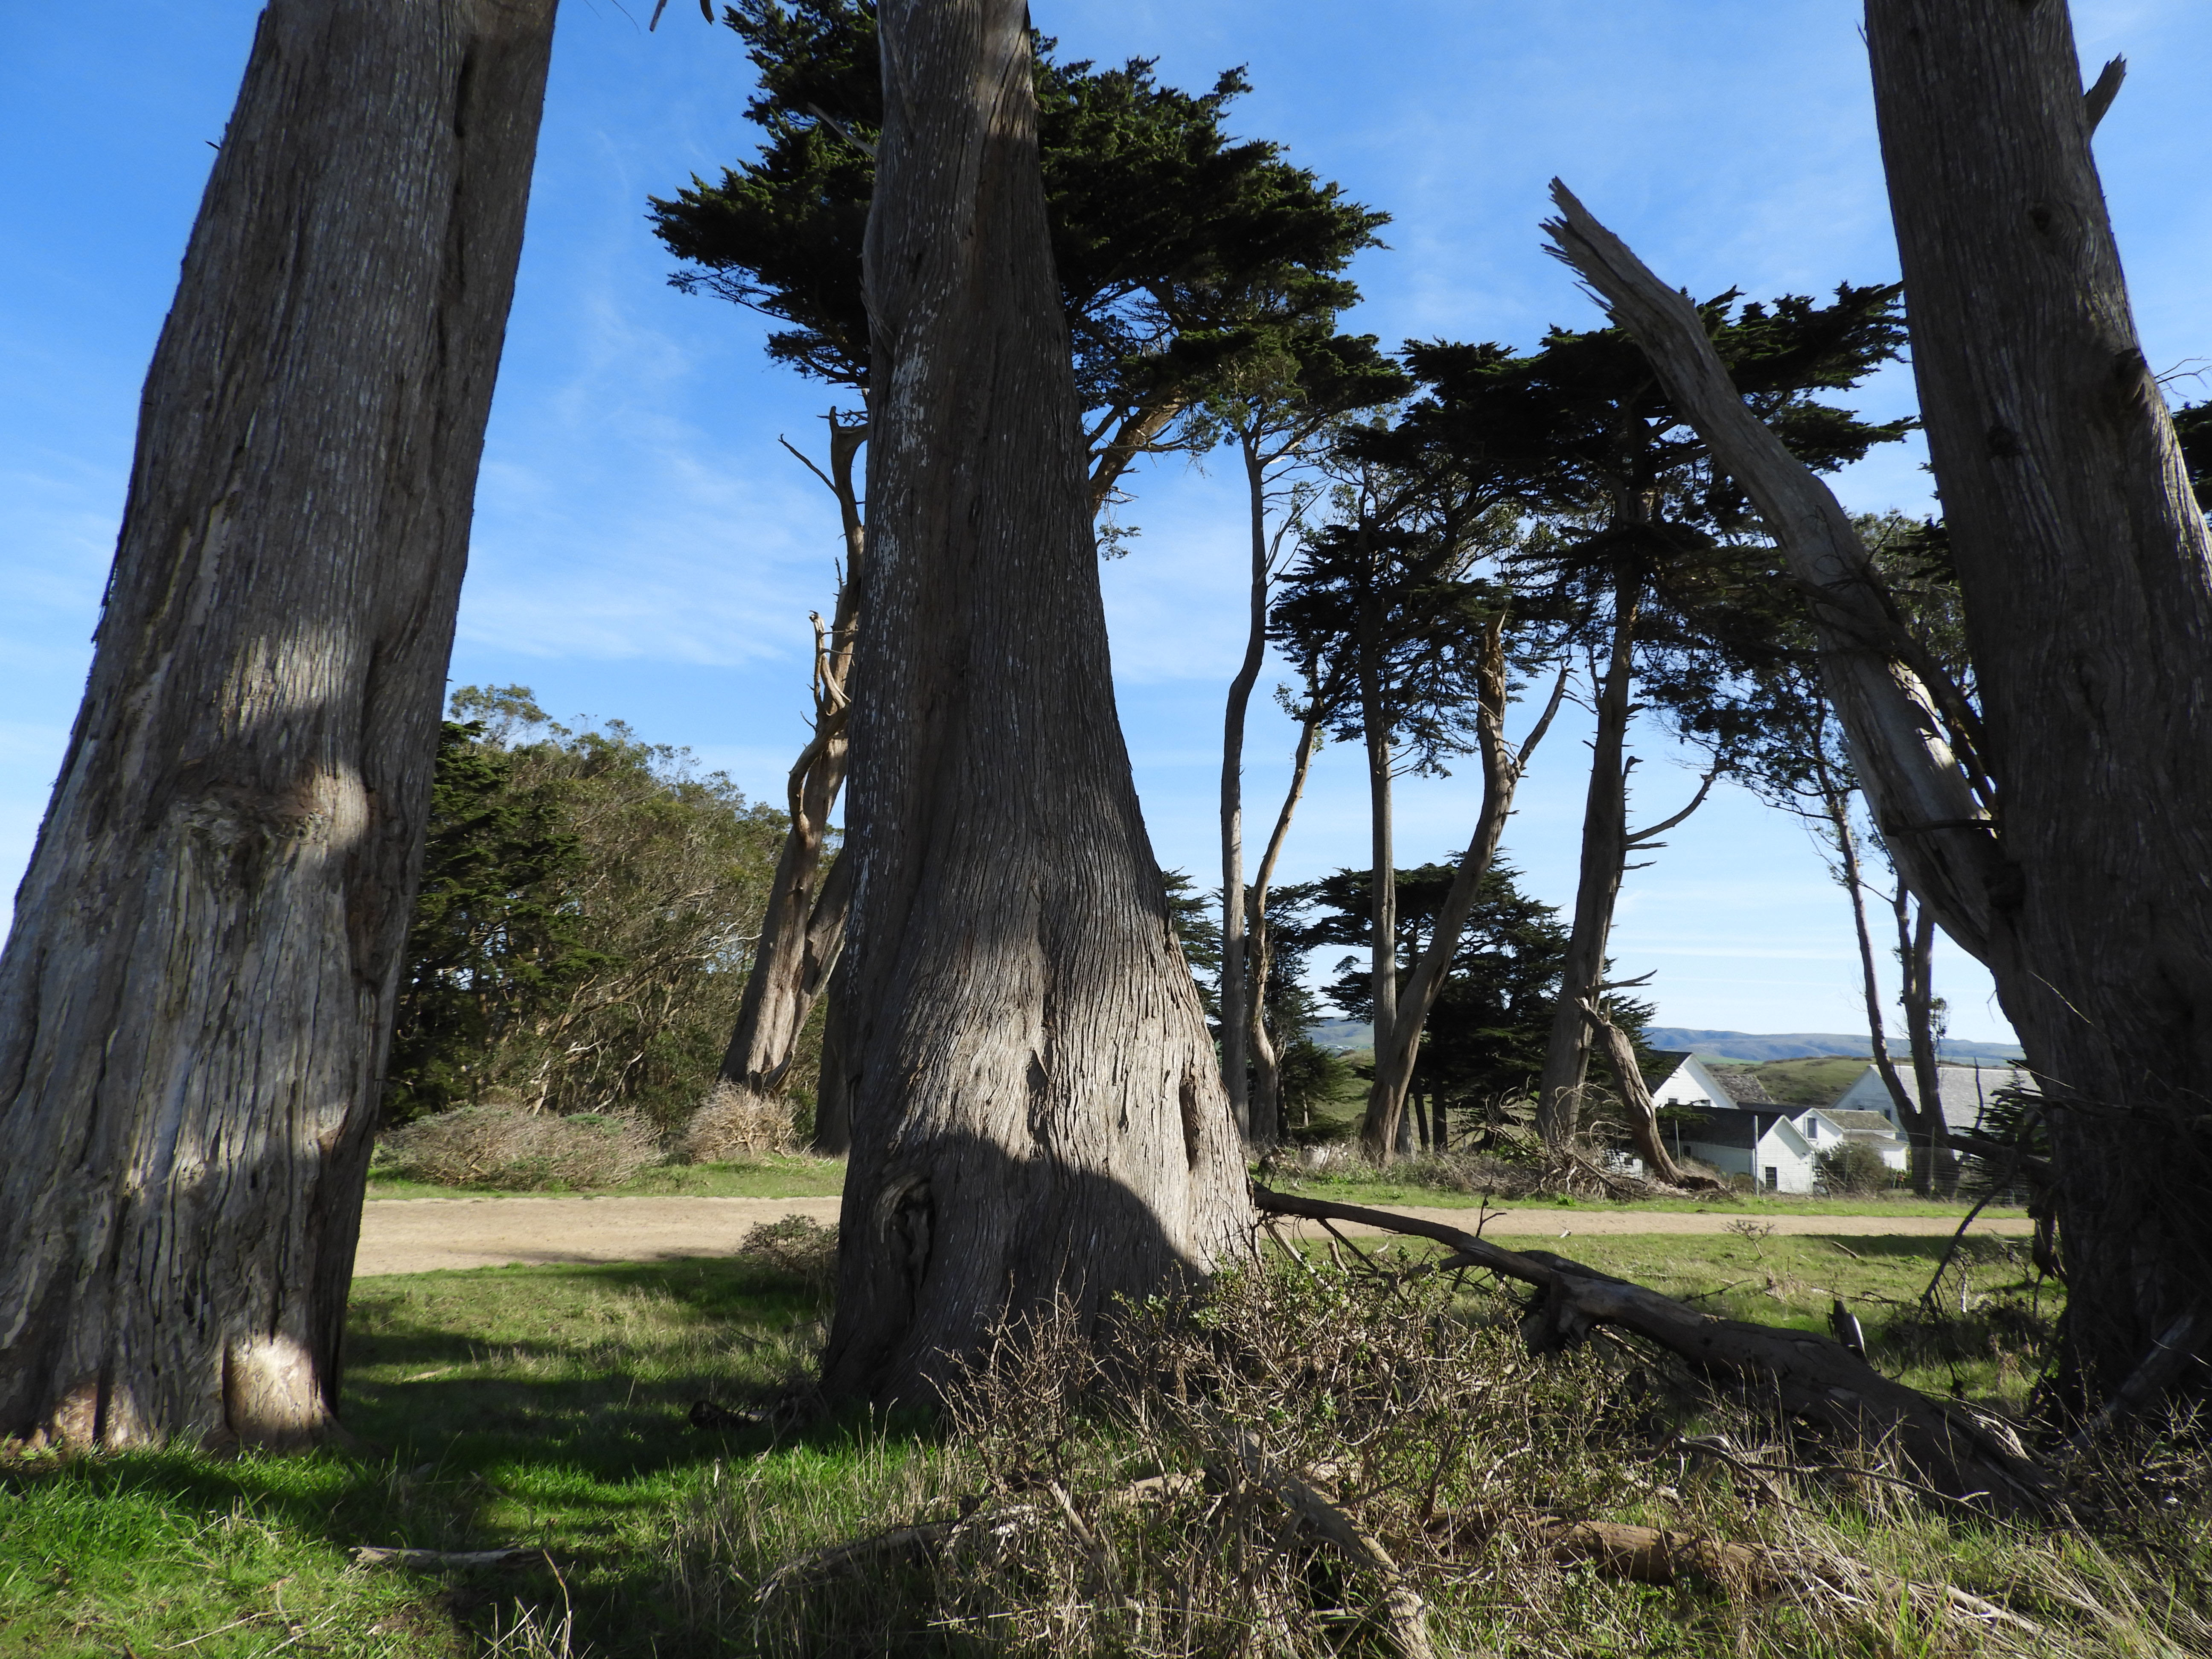 TOMALES BAY, PIERCE POINT RANCH